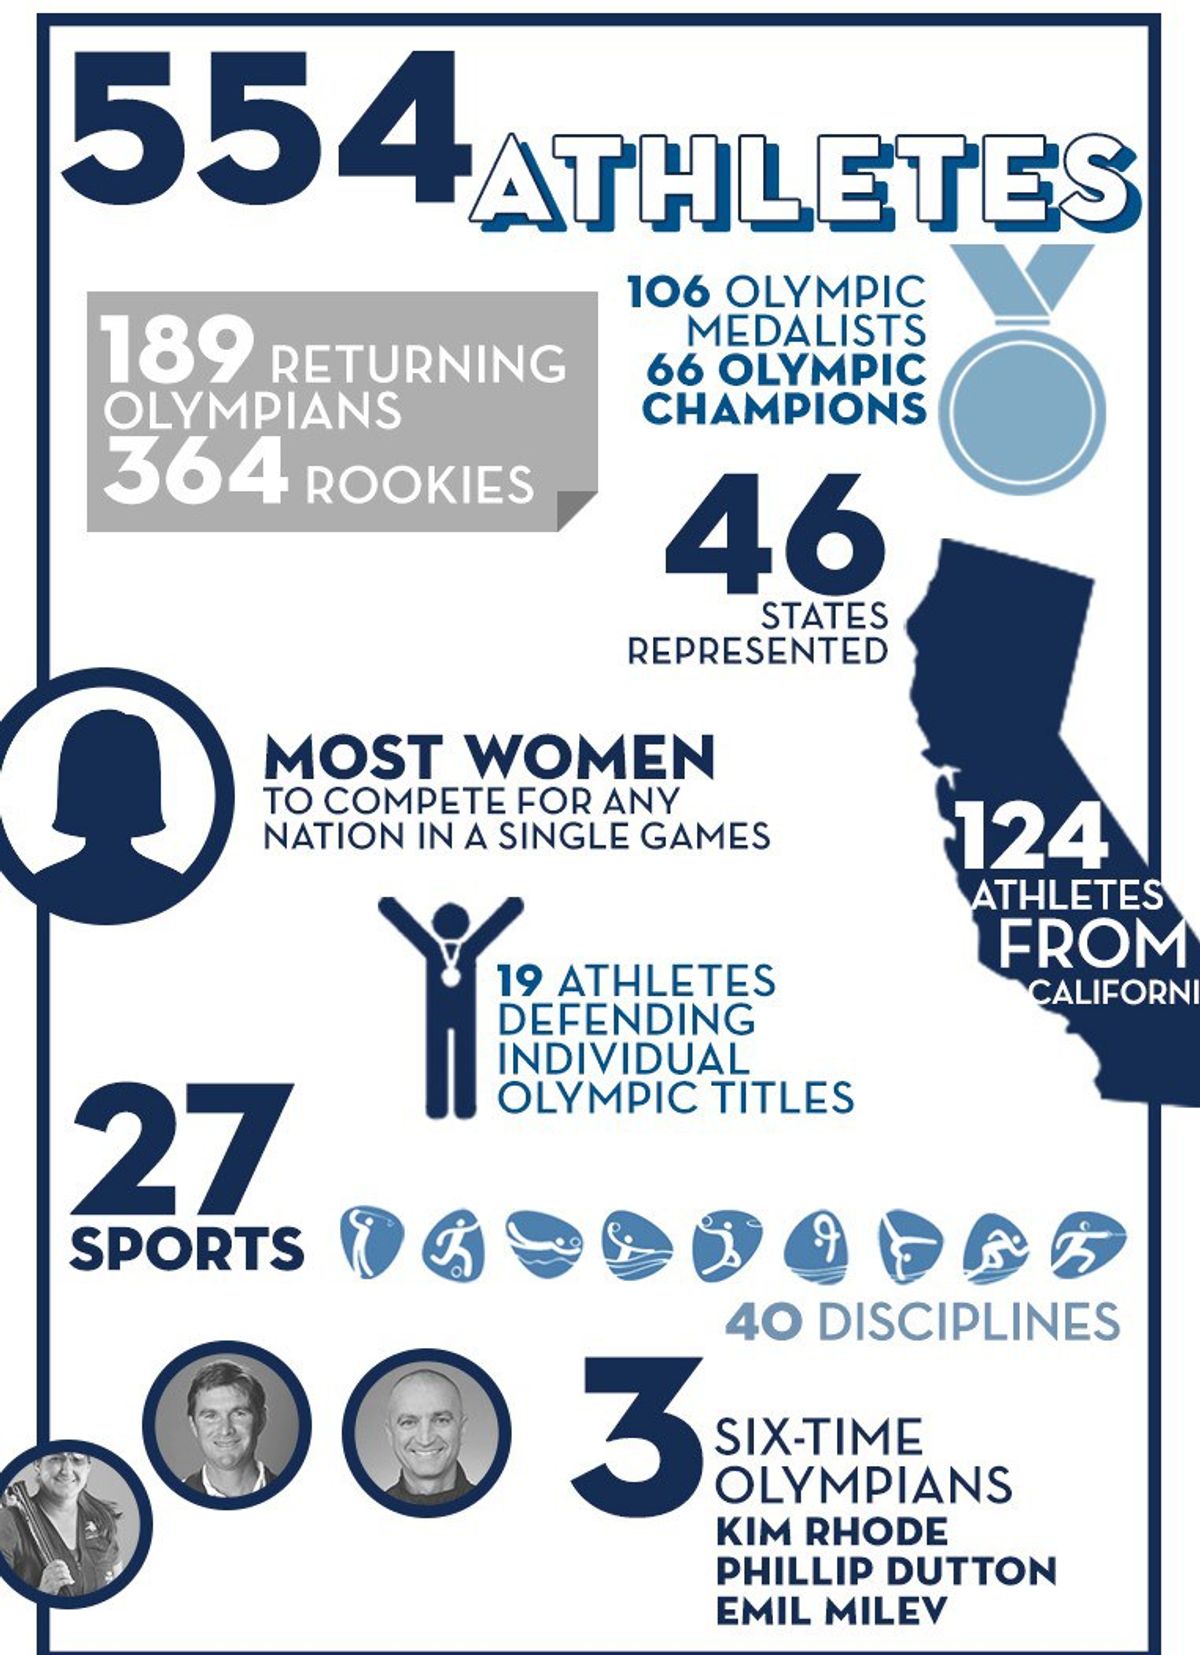 39 Facts You Probably Didn't Know About Team USA